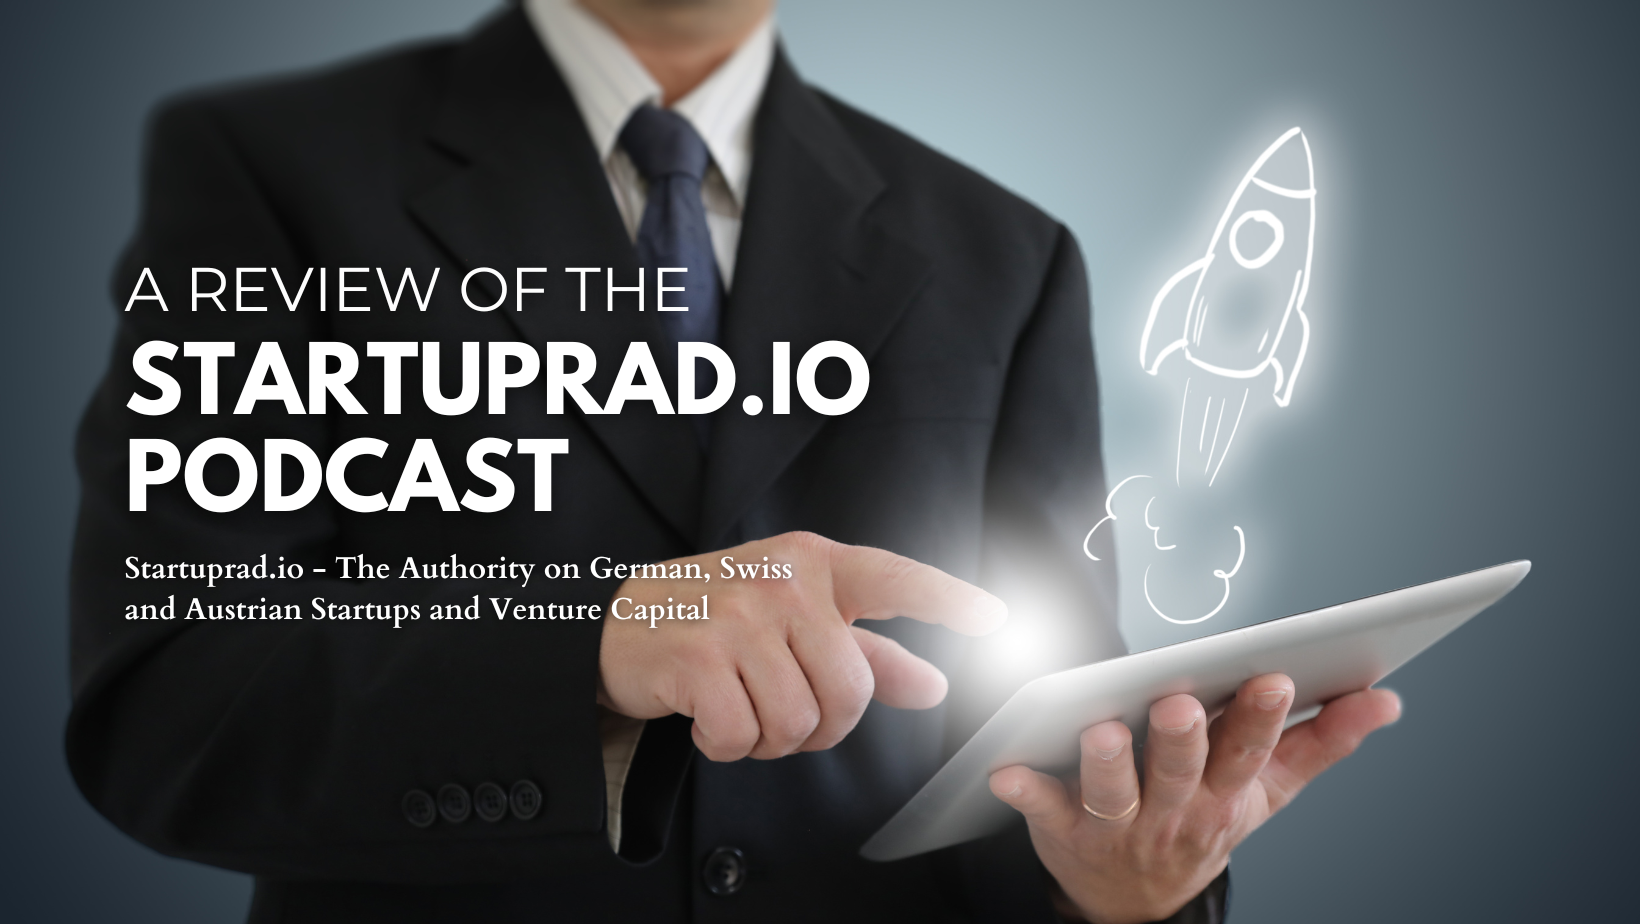 A Review of the Startuprad.io Podcast